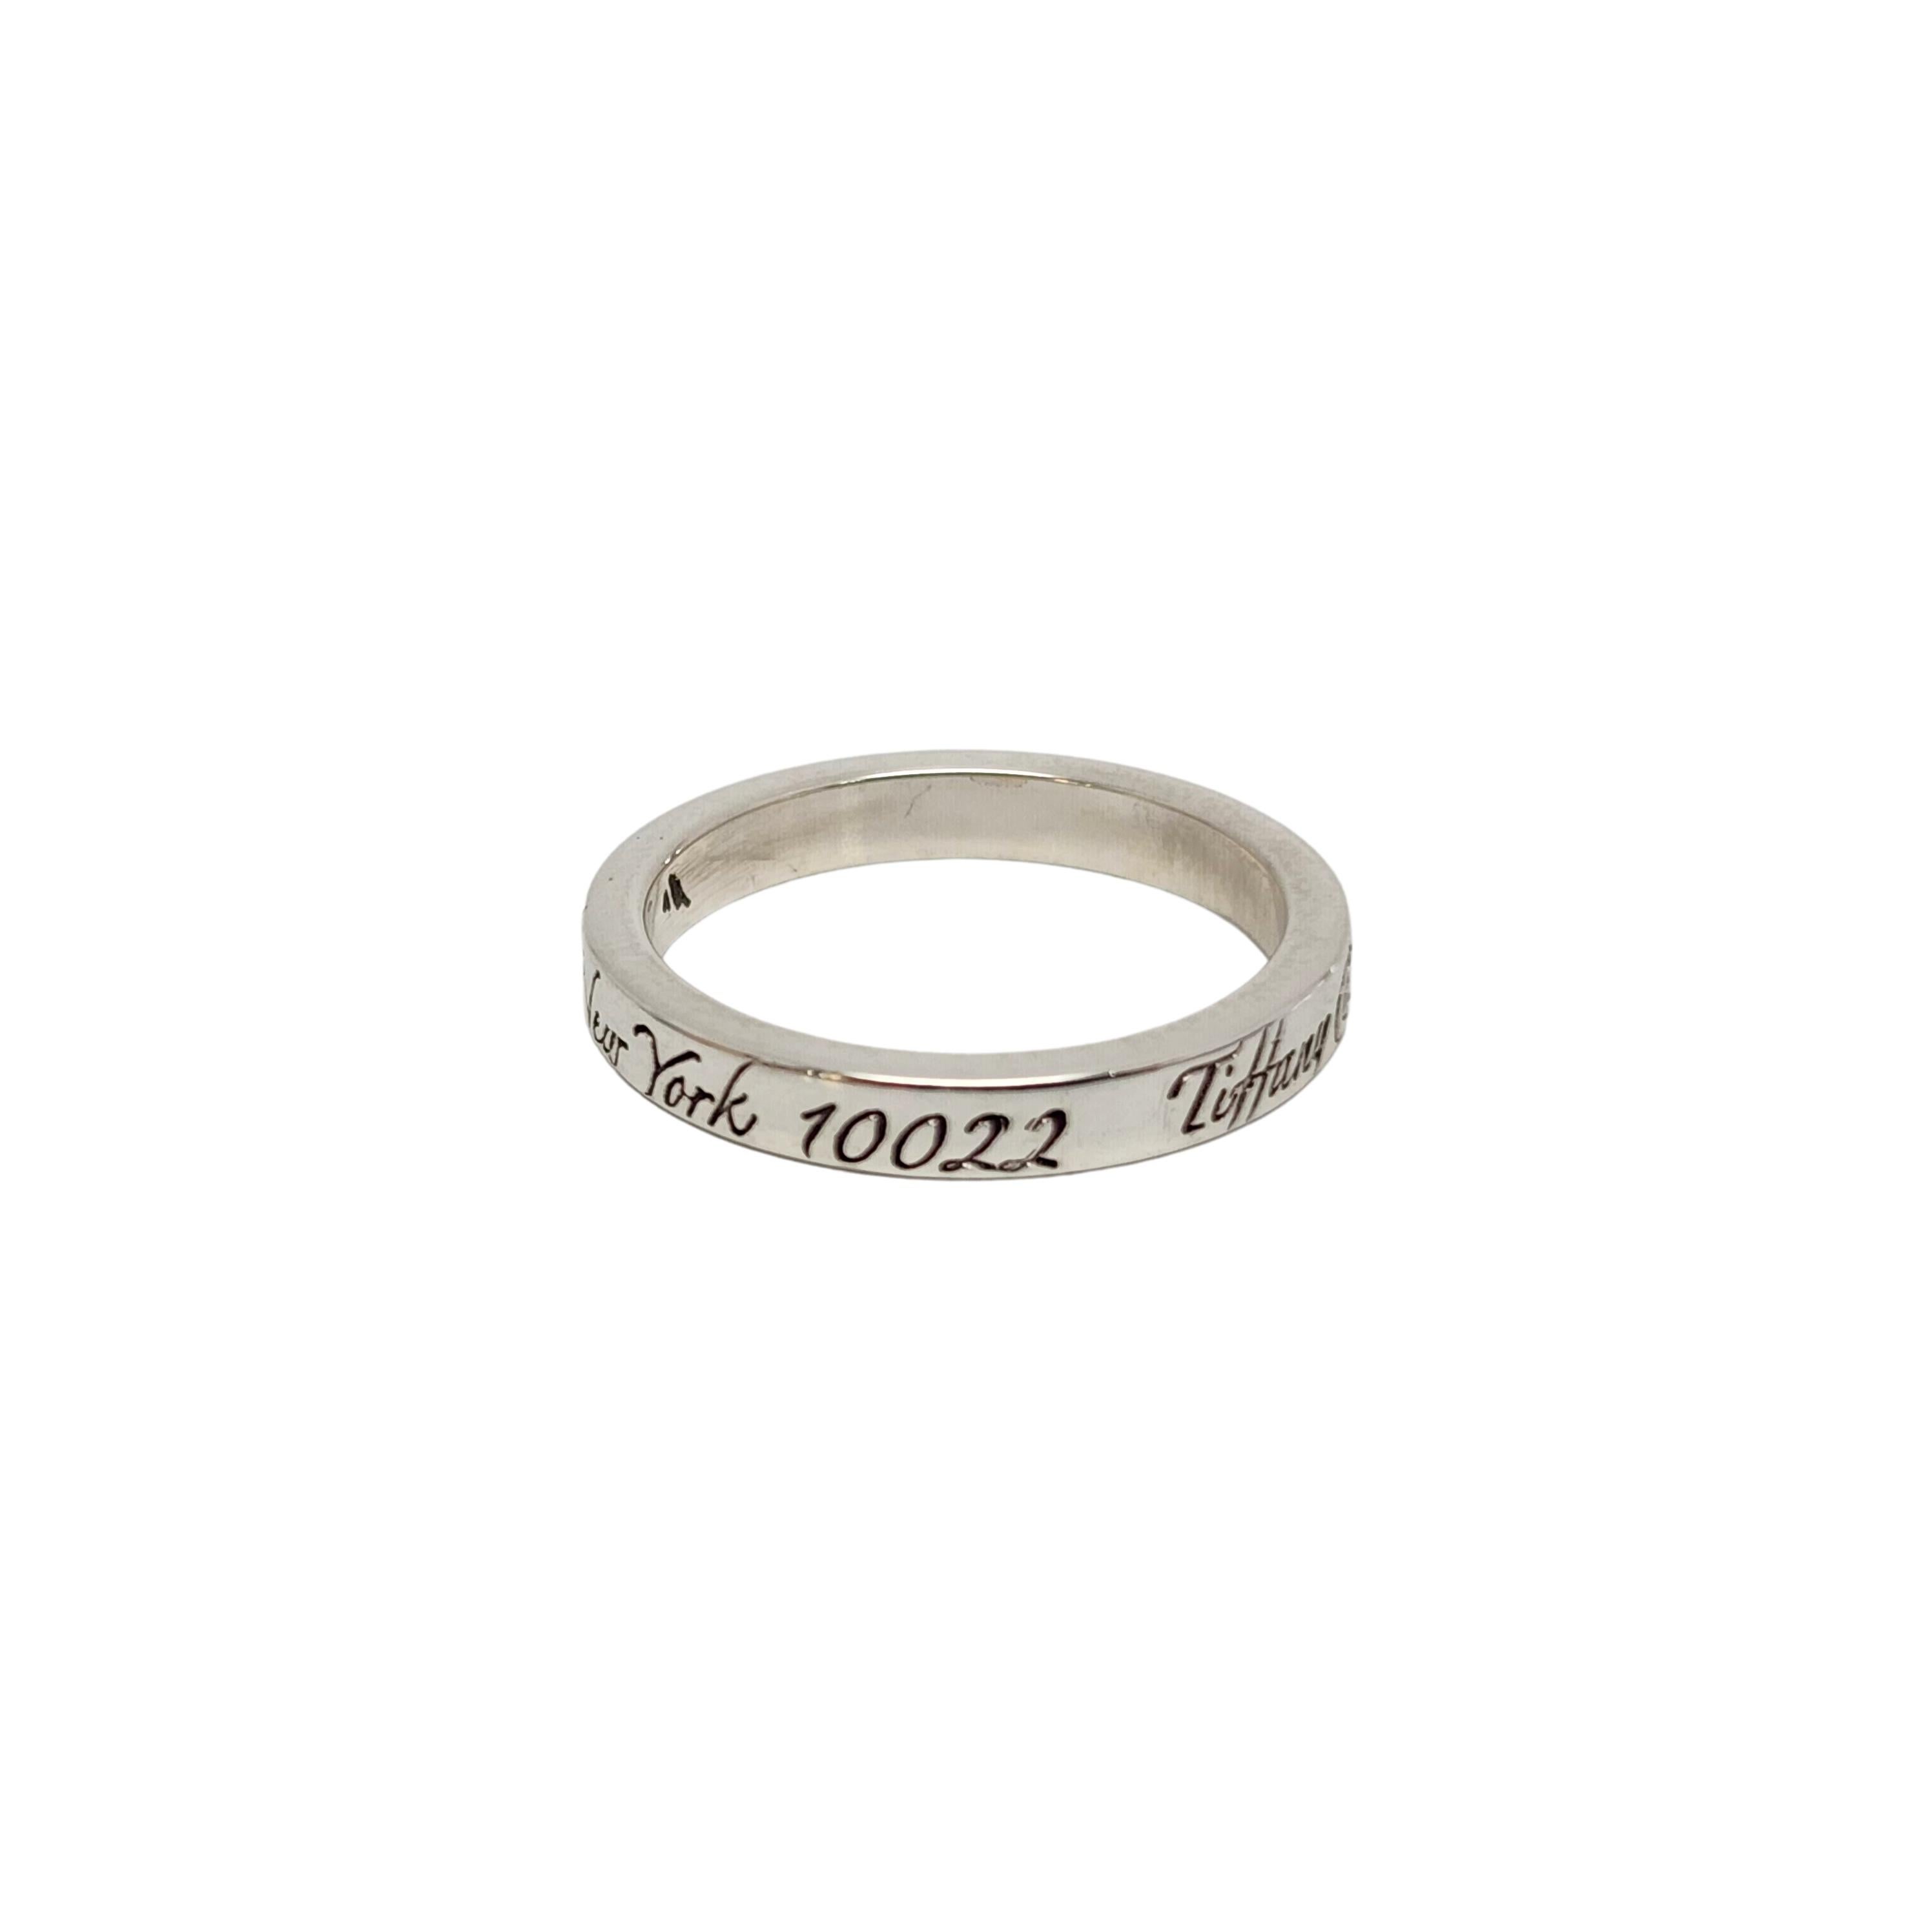 Tiffany & Co New York Address Notes Narrow Band Ring Taille 5,25 n°13007 Pour femmes en vente